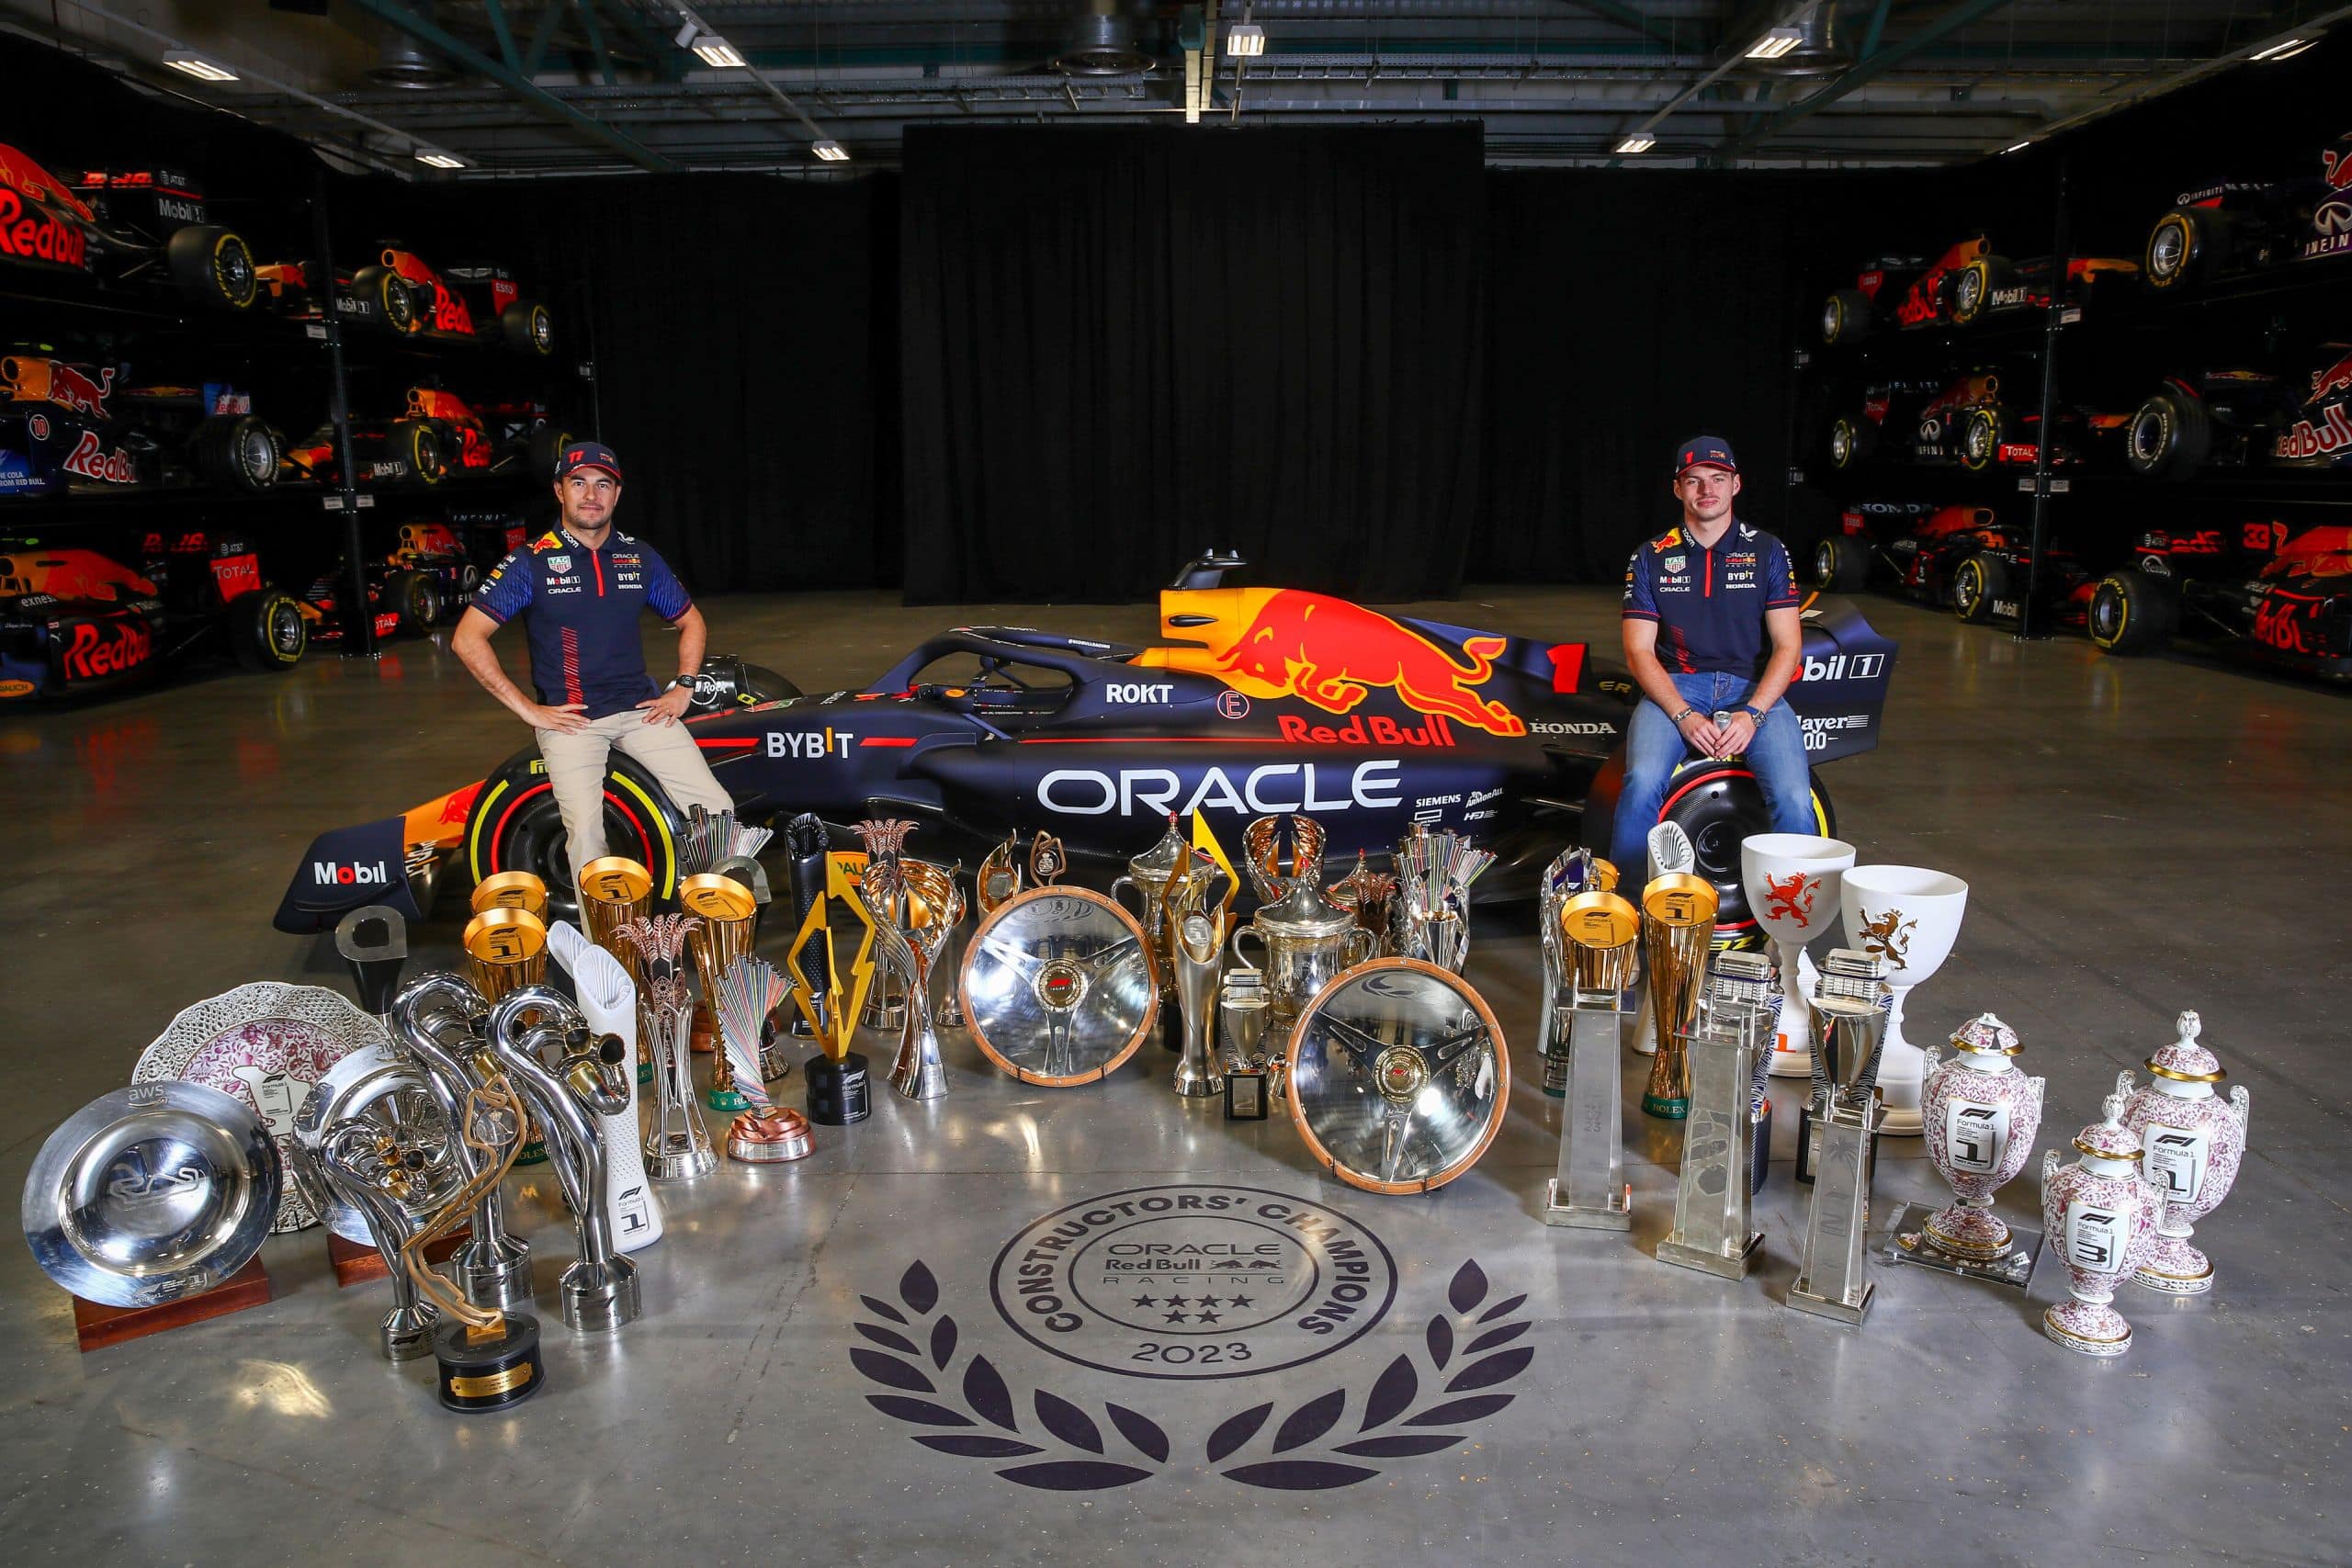 Winners And Losers Of The 2023 F1 Season